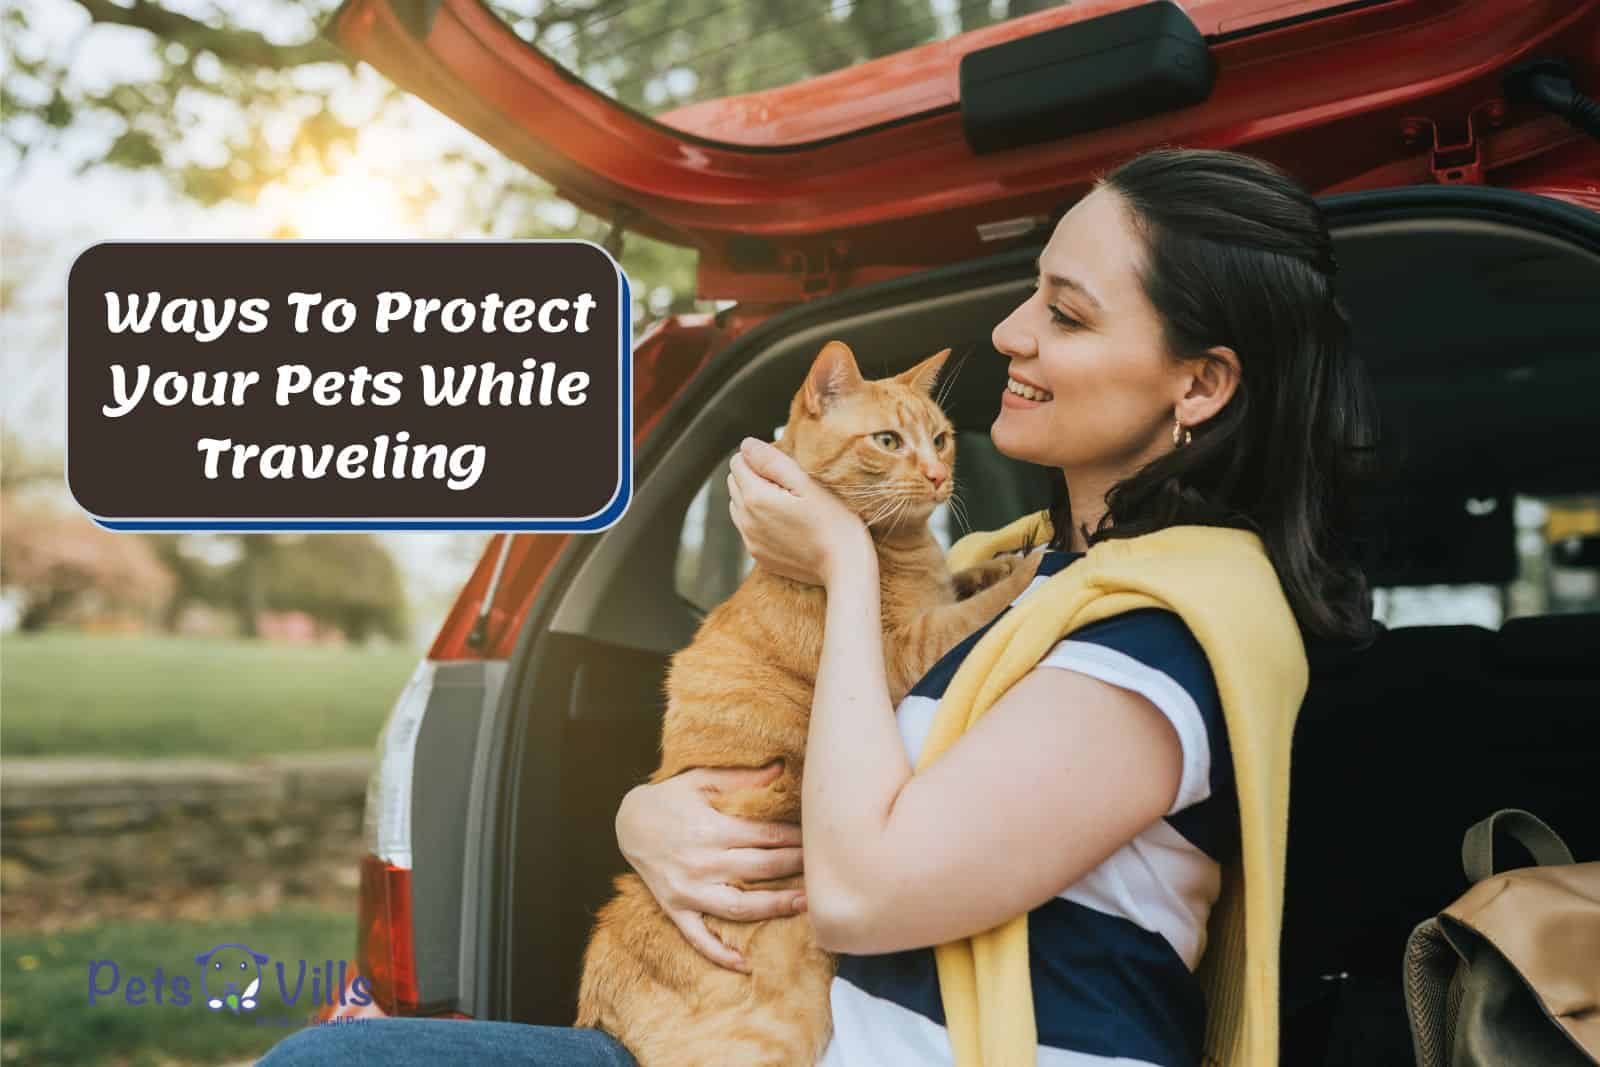 Cat traveling with her fur mom but what are the Ways To Protect Your Pets While Traveling?